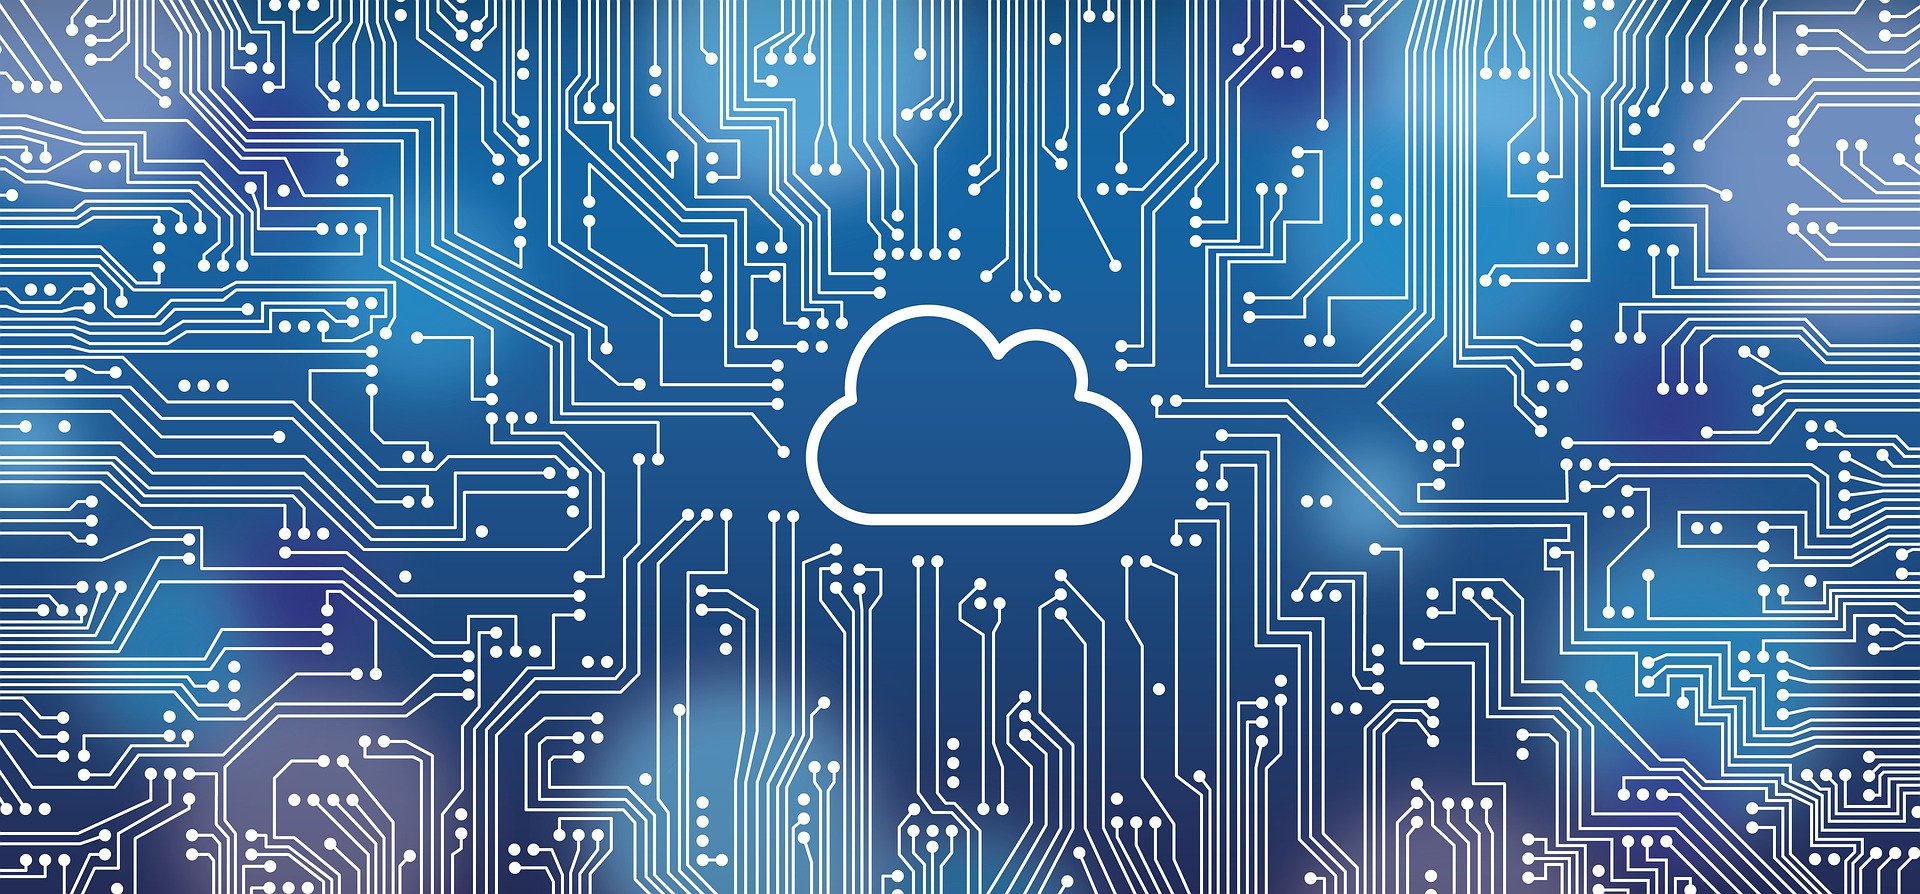 An illustration of a cloud over a graphic of computer circuts.